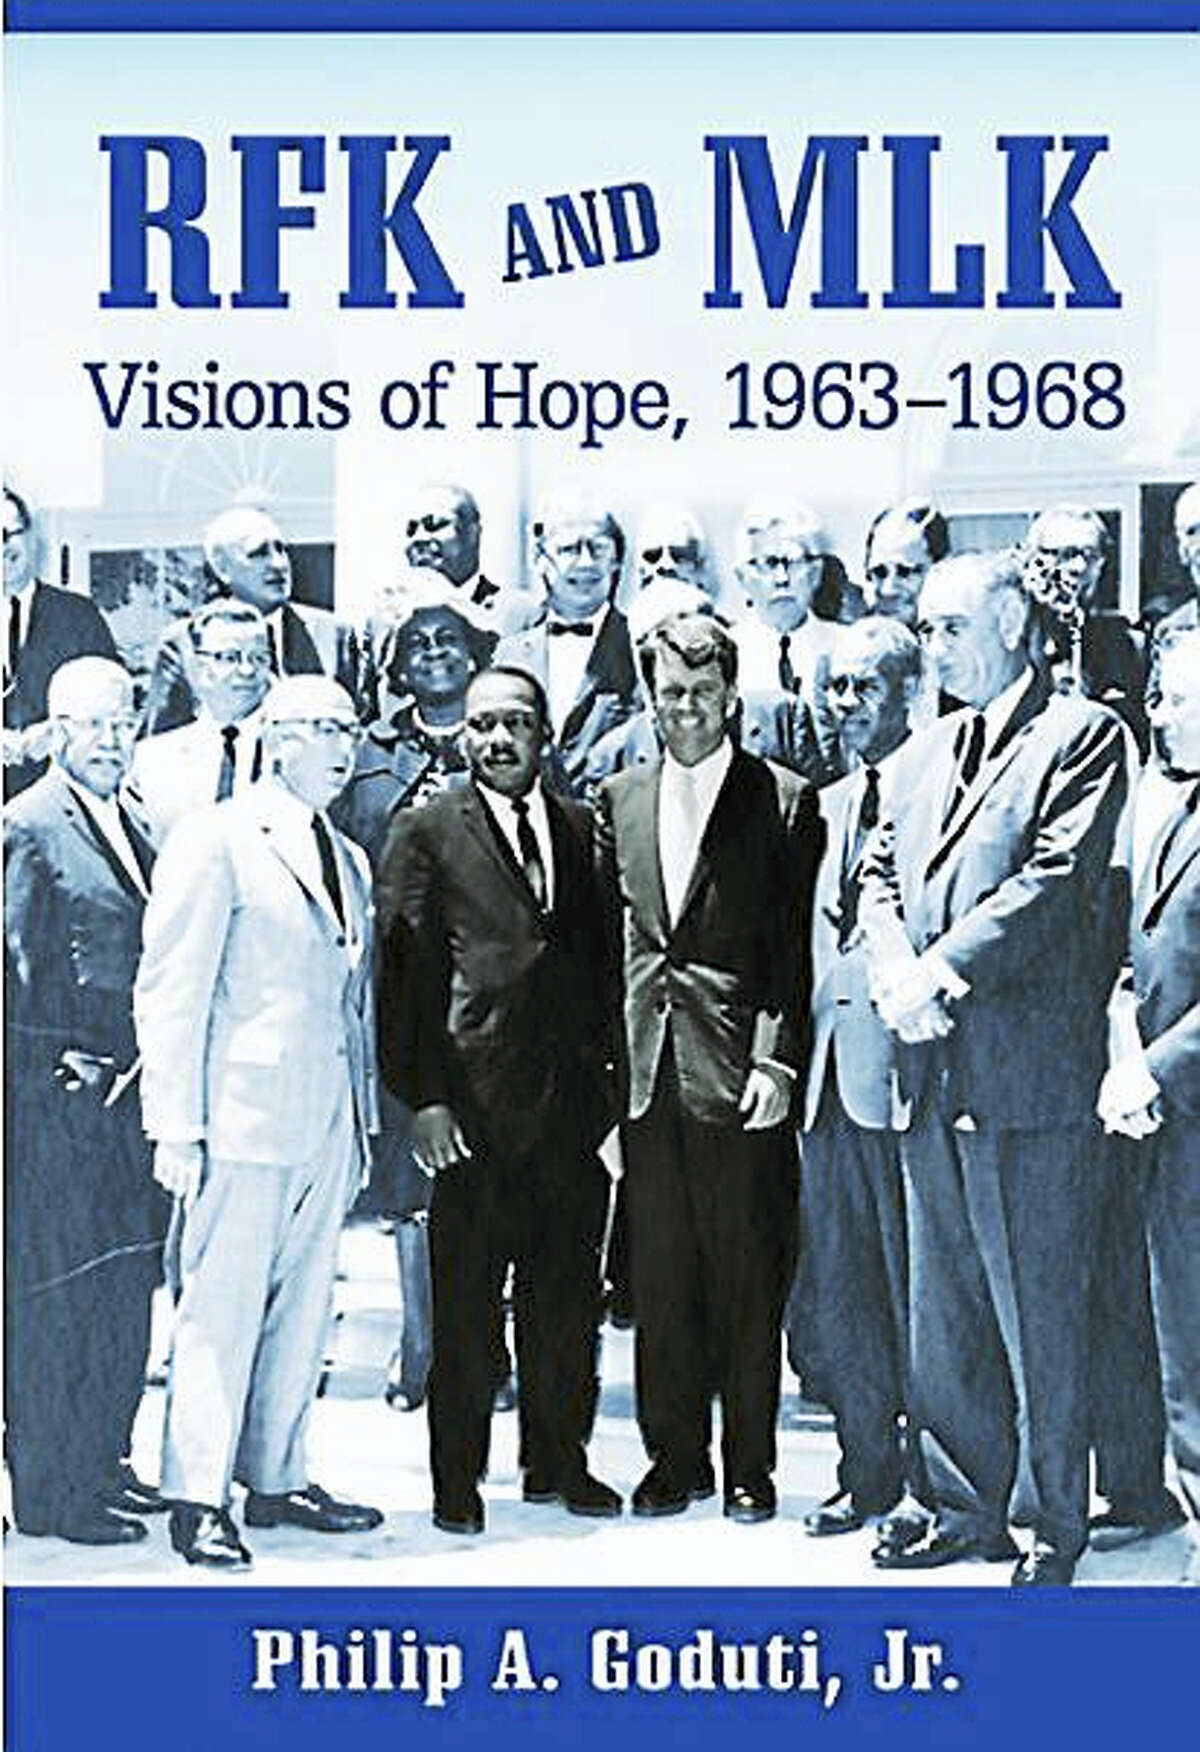 The book “examines their shared vision through their speeches, writing and public appearances during the cultural ground shift of 1963 through 1968.”